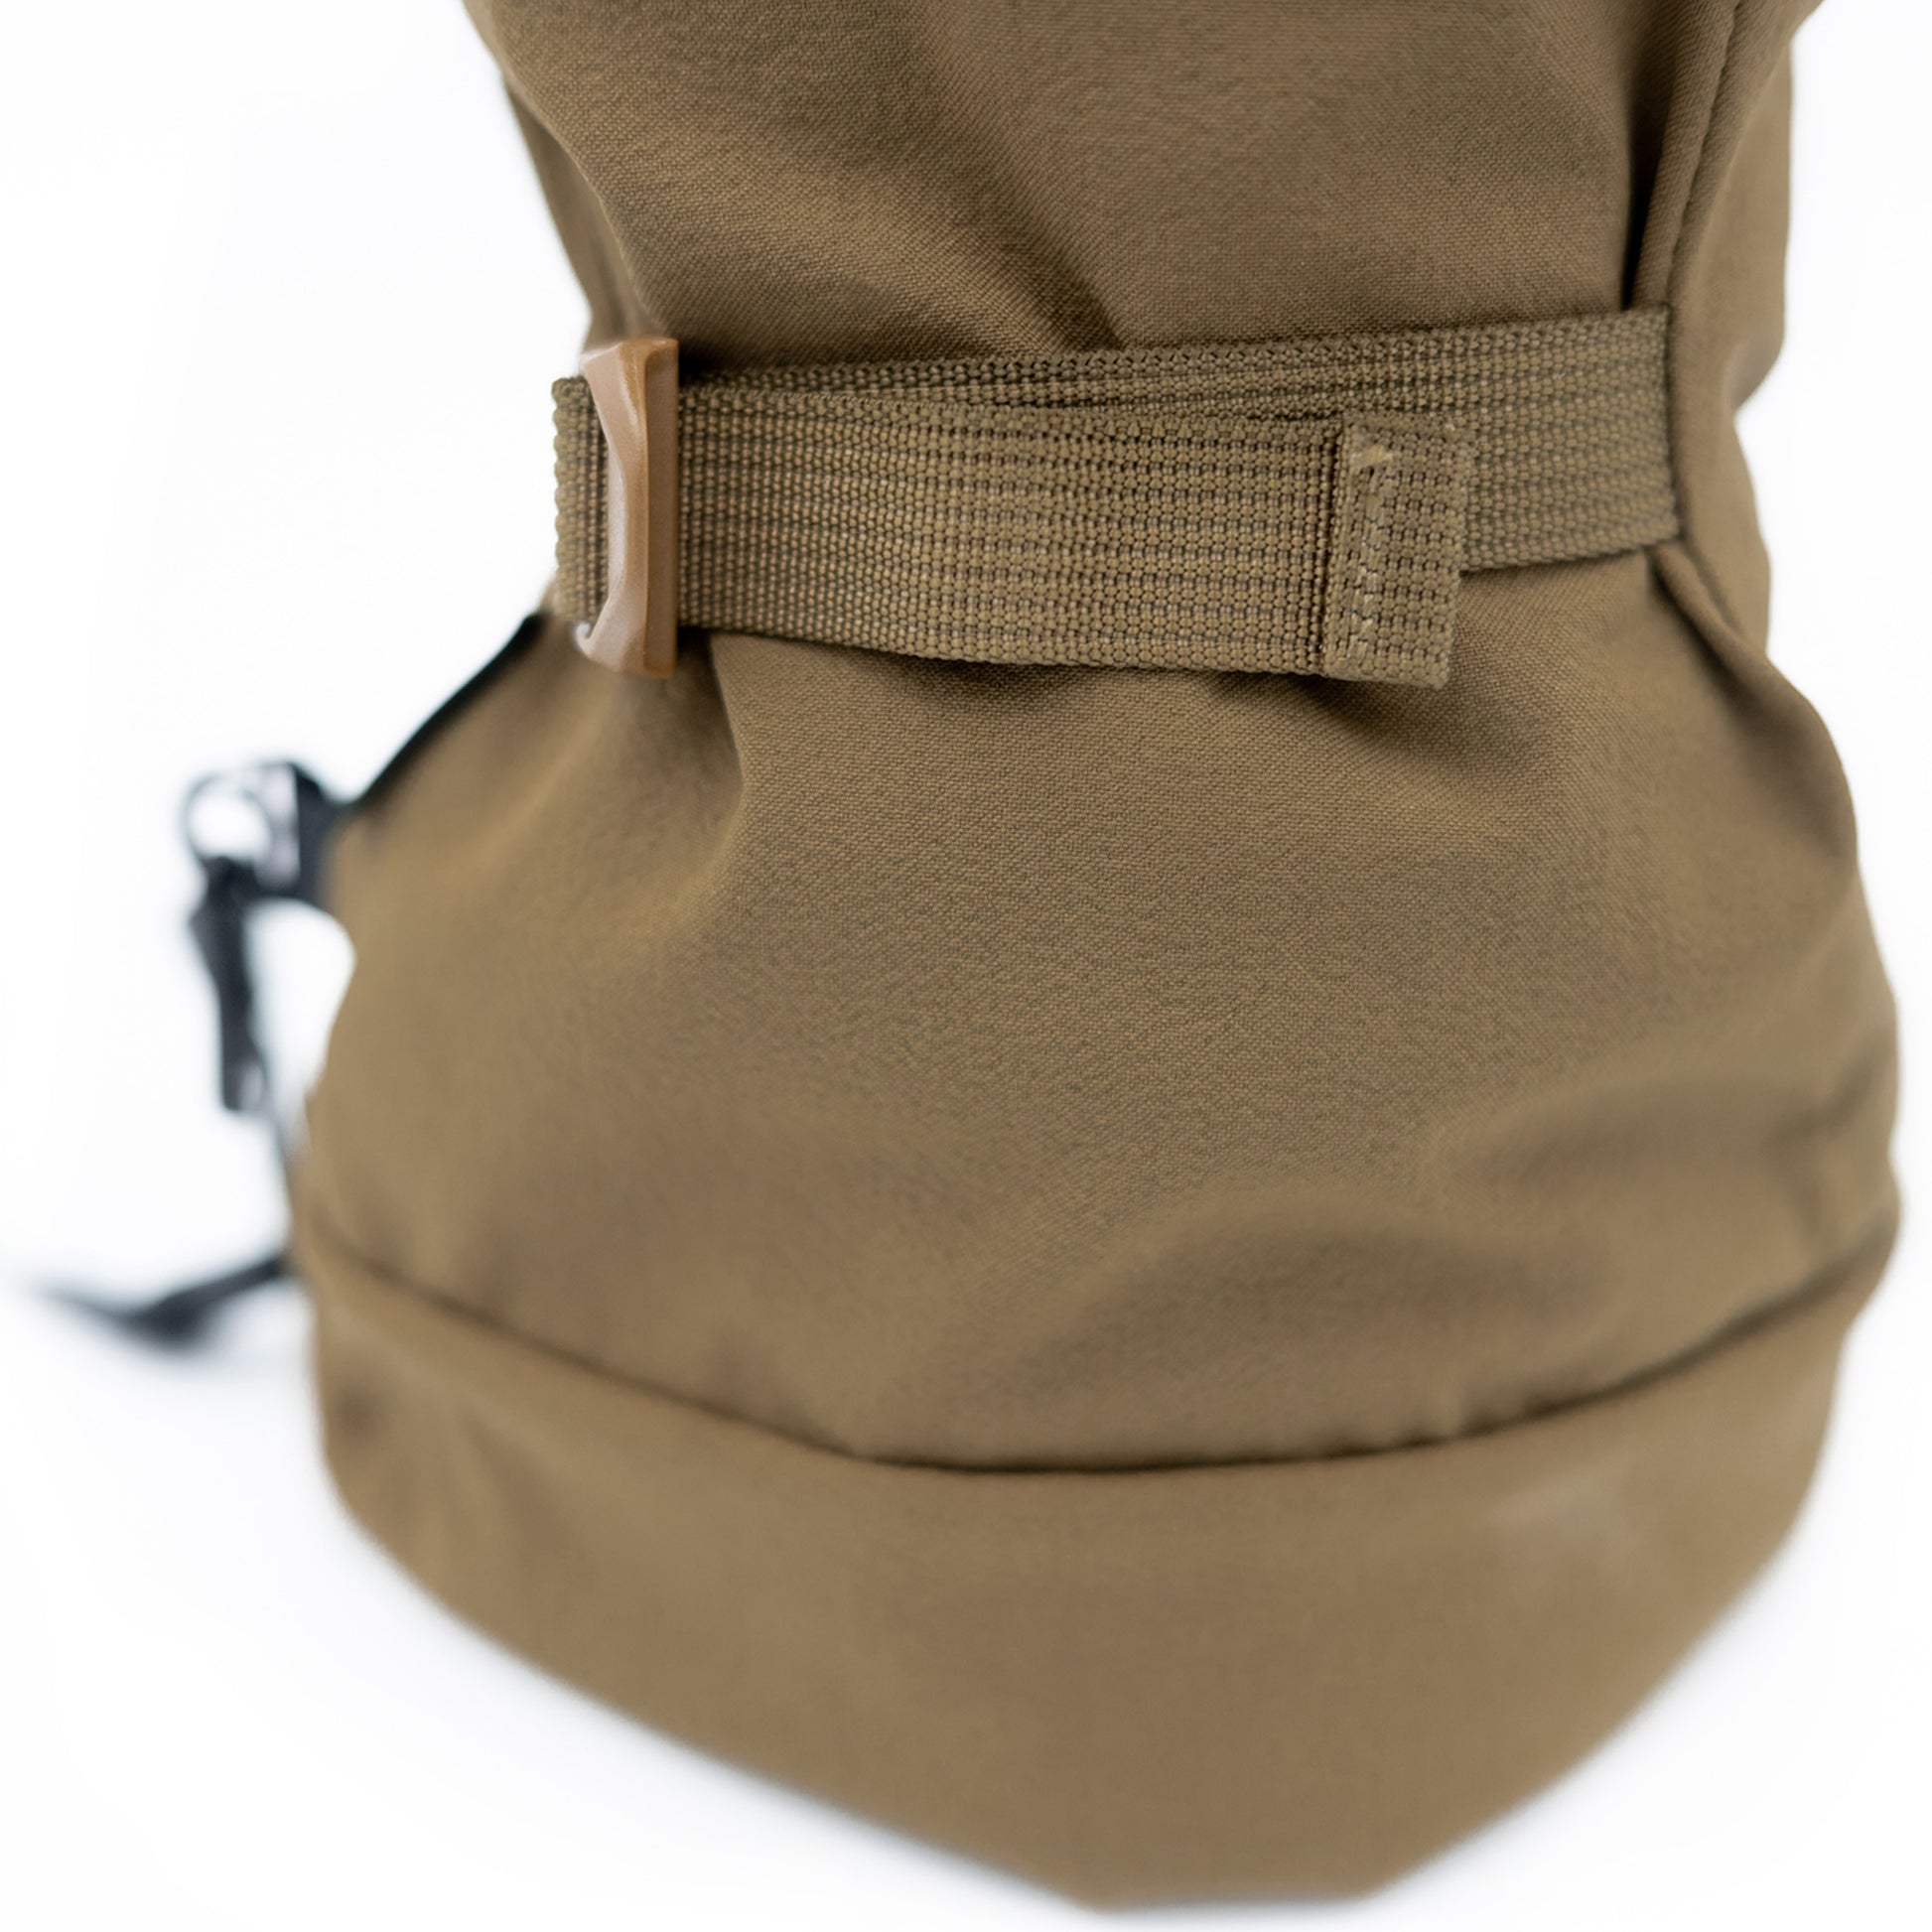 The back of a brown Mainers backpack with a strap.